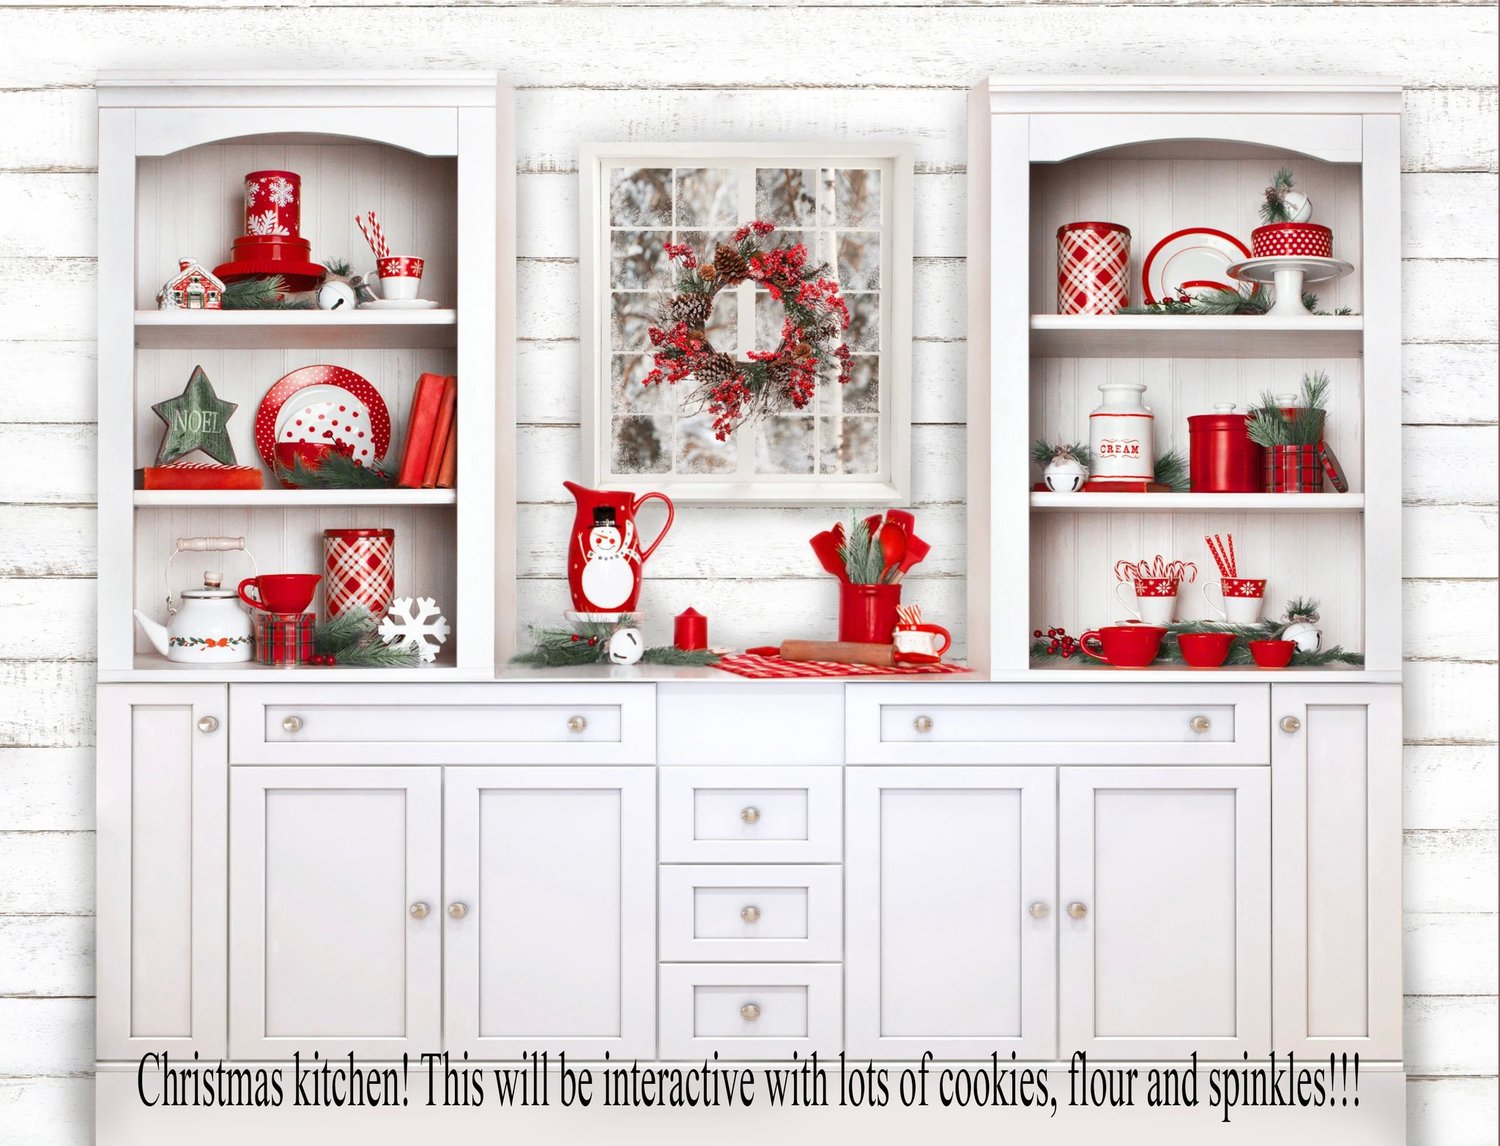 Image of November 12th Christmas Cookies in the Kitchen:after purchase available times will be emailed